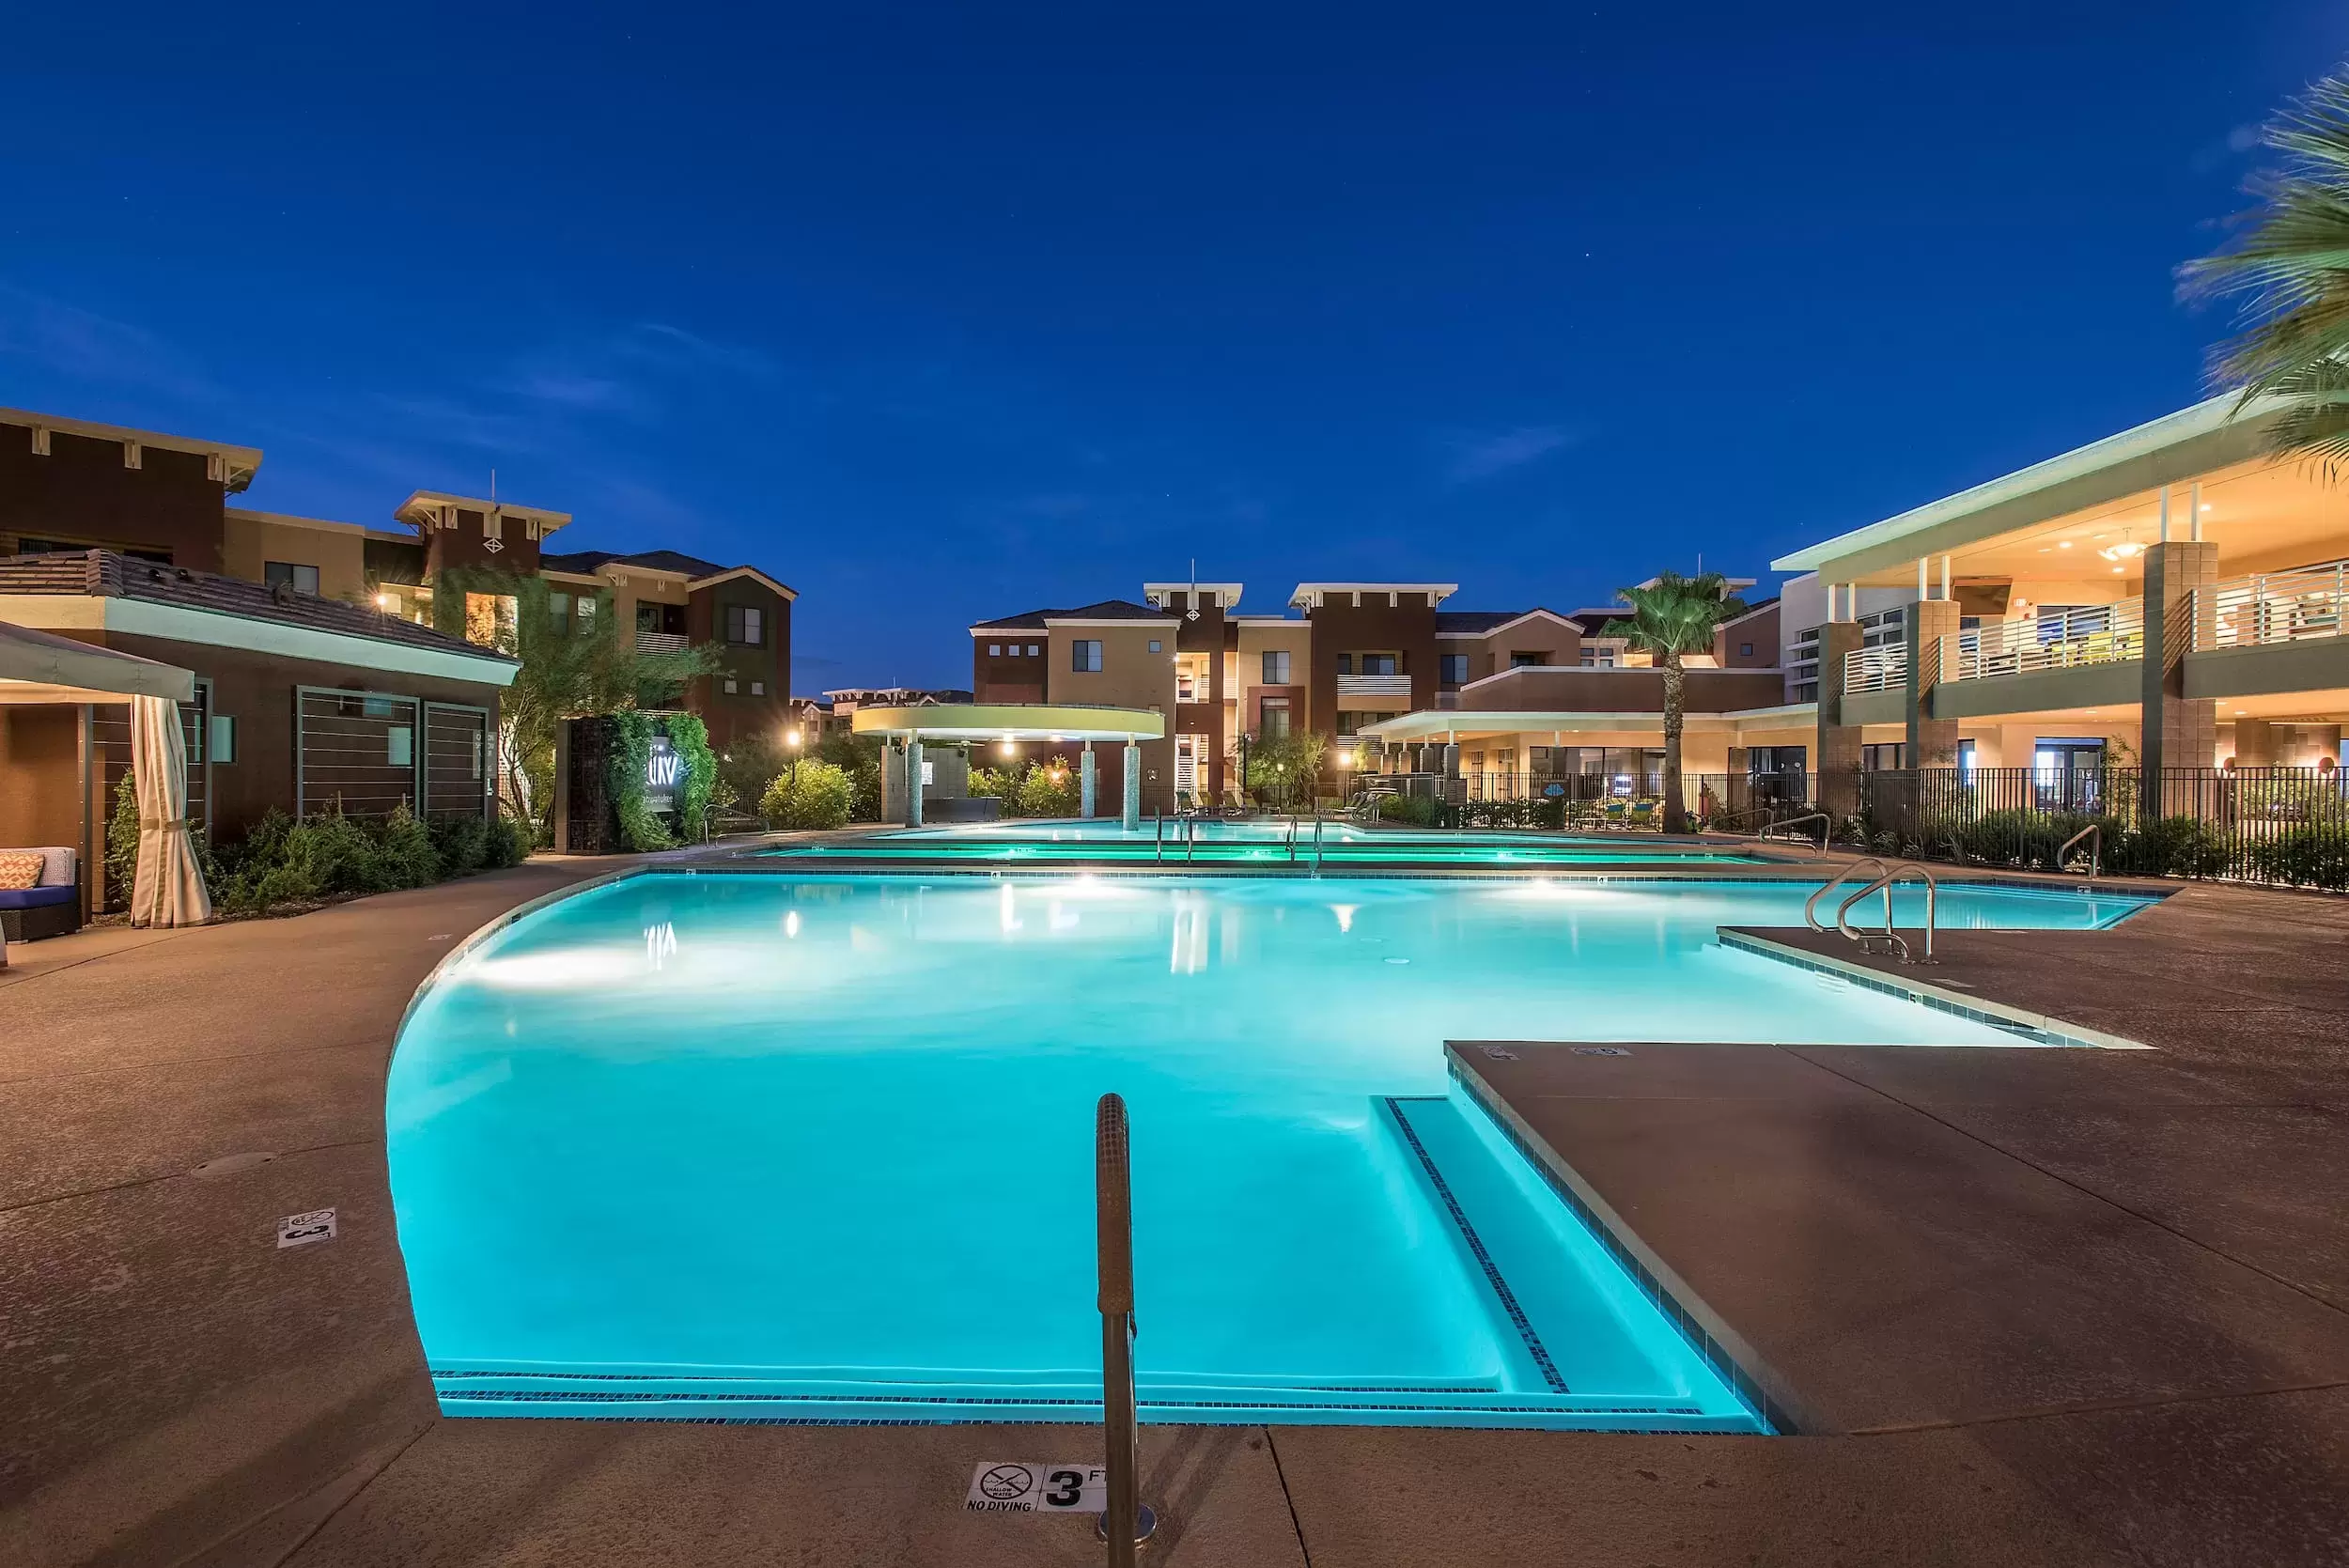 The beautiful pool and patio area for the Liv Ahwatukee community.